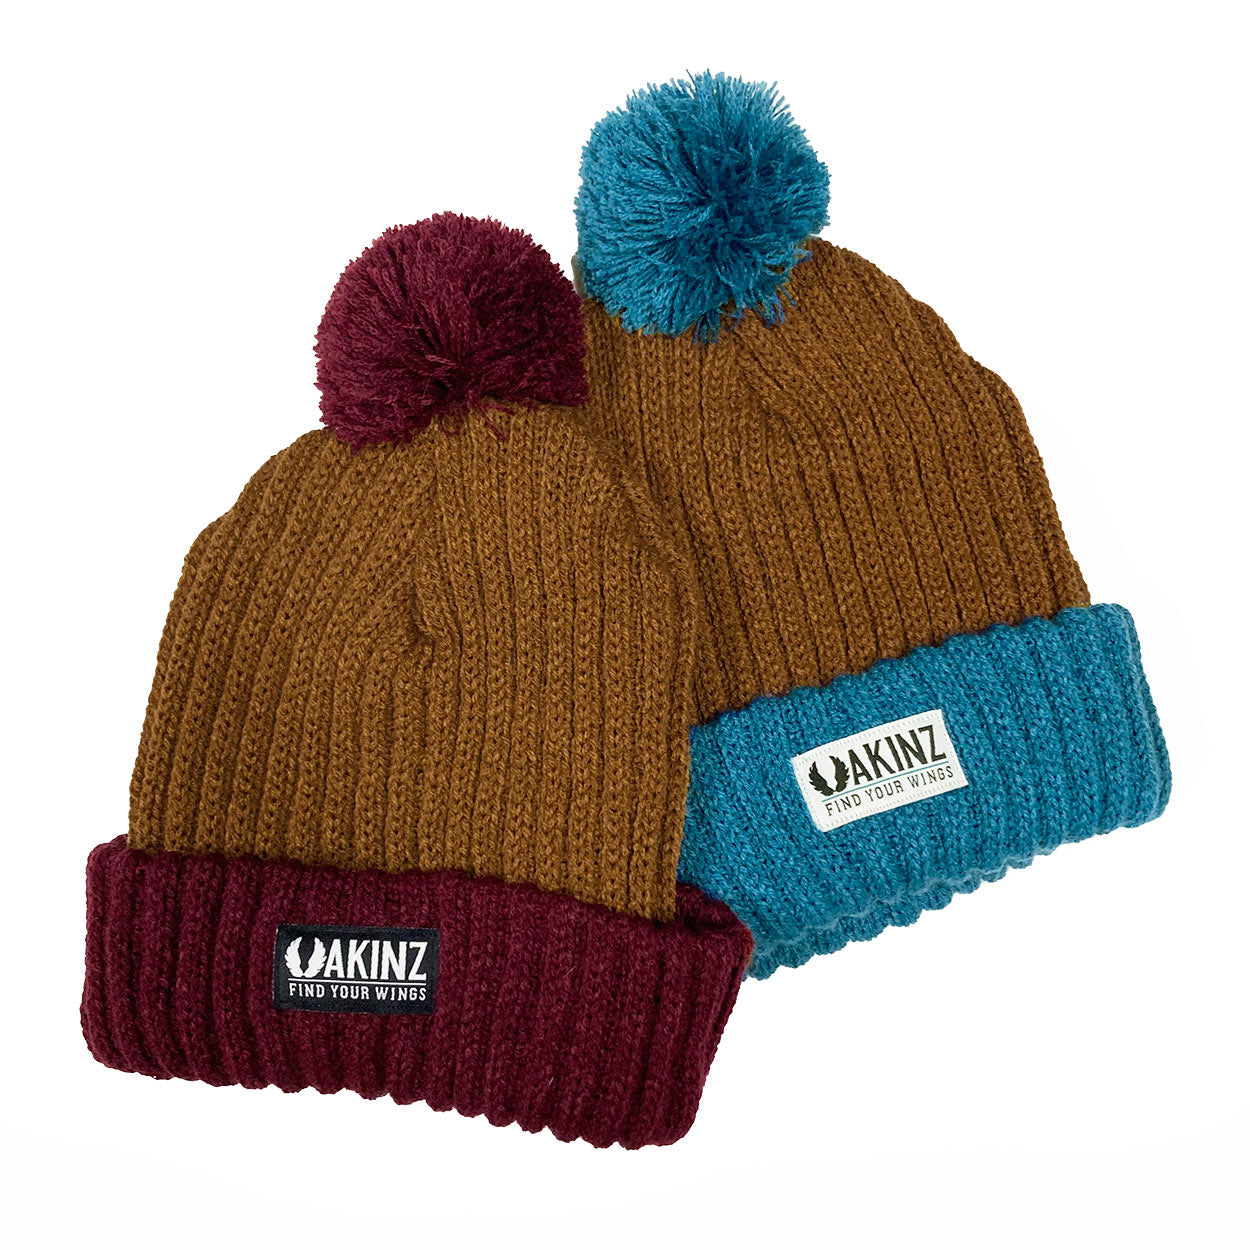 find-your-wings-pom-beanie.jpg